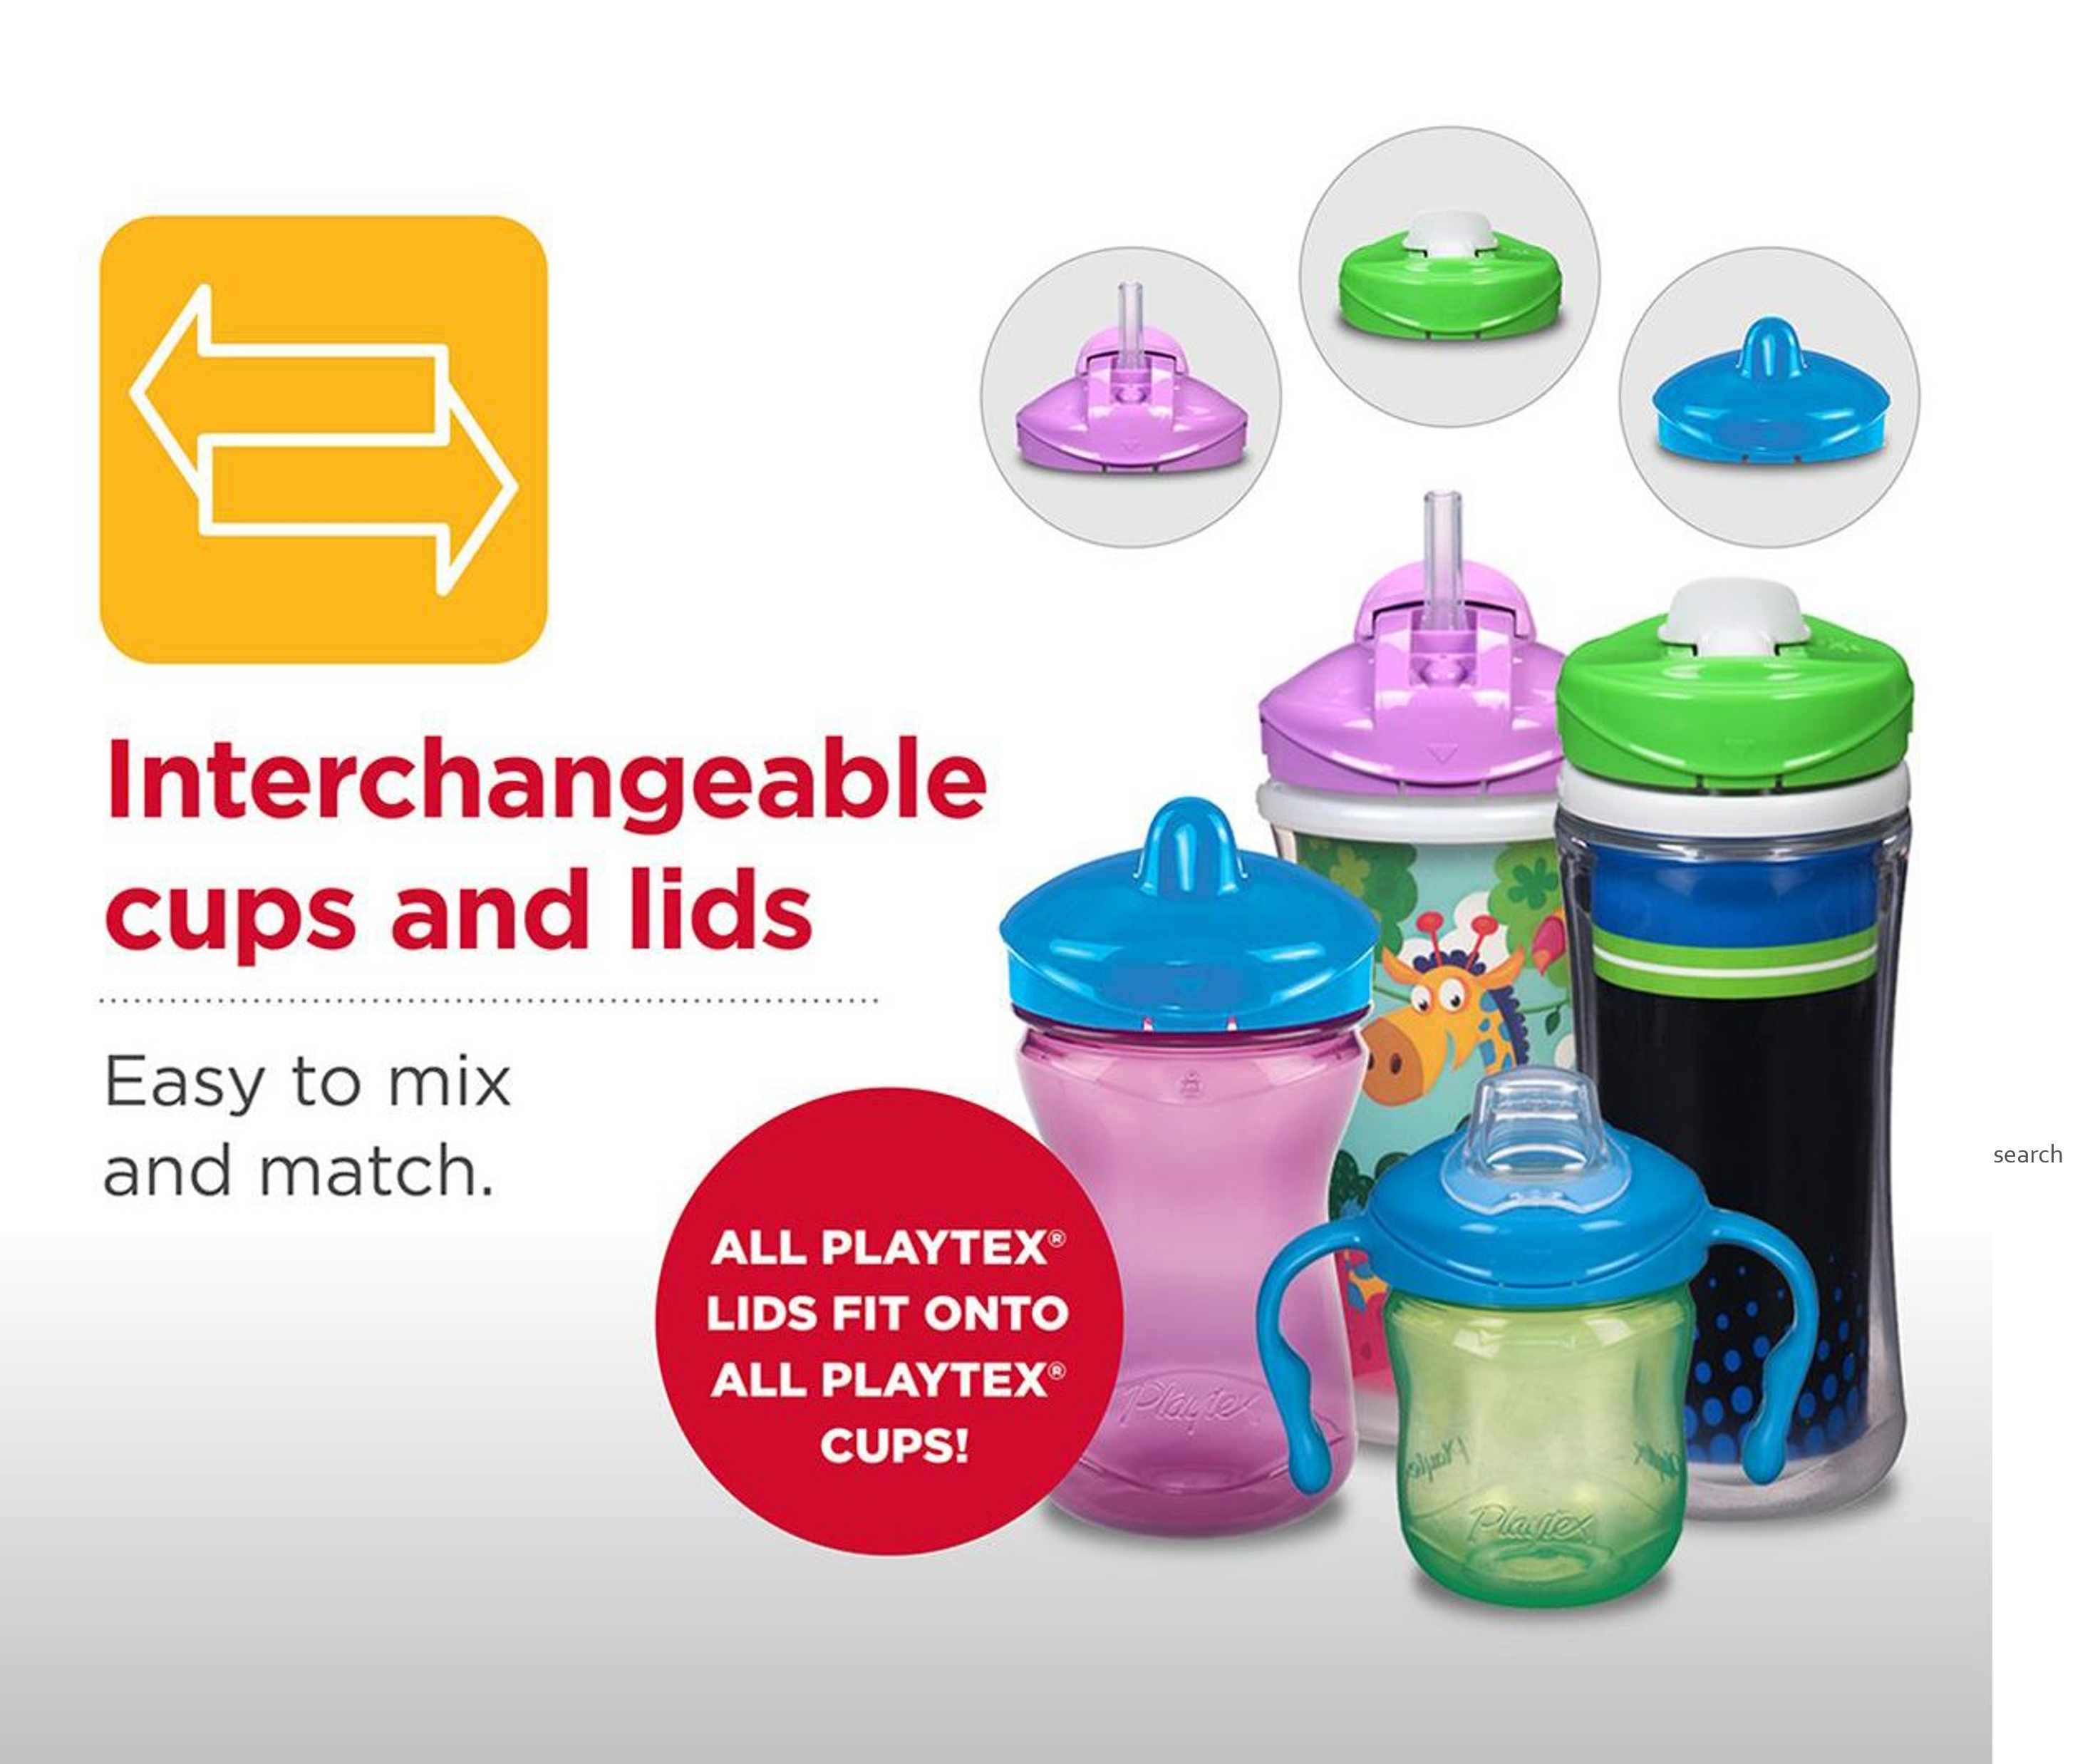 Playtex® Stage 3 Straw Cup - Car and Construct